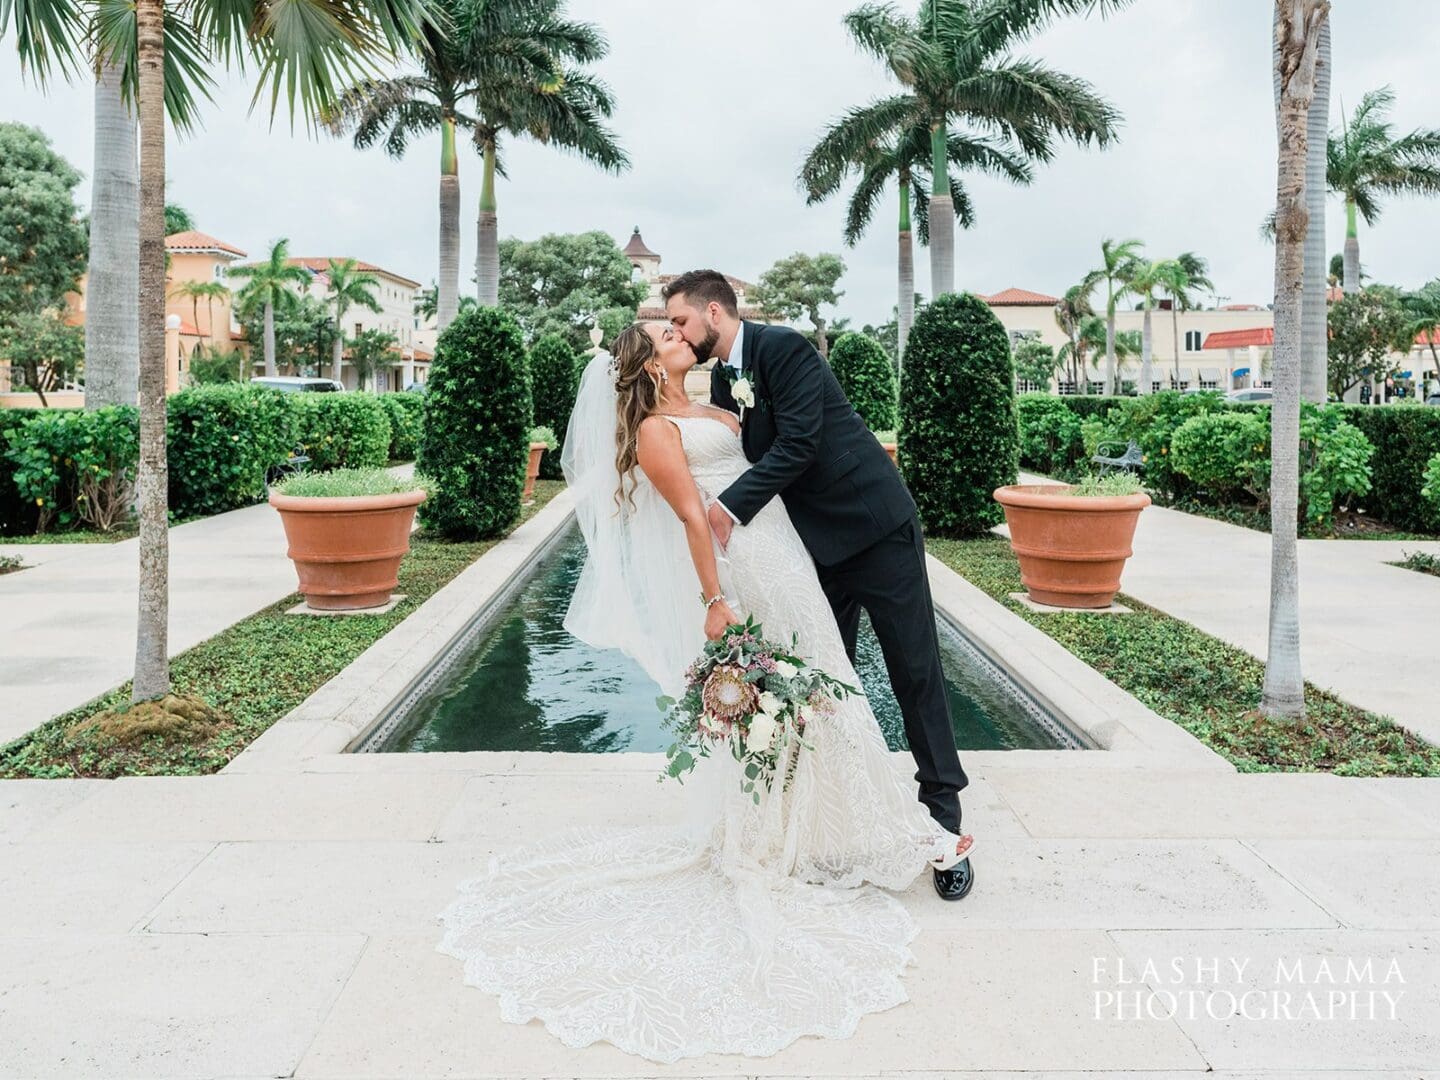 A bride and groom kiss romantically beside a narrow outdoor water feature, surrounded by palm trees and manicured shrubs, under an overcast sky.